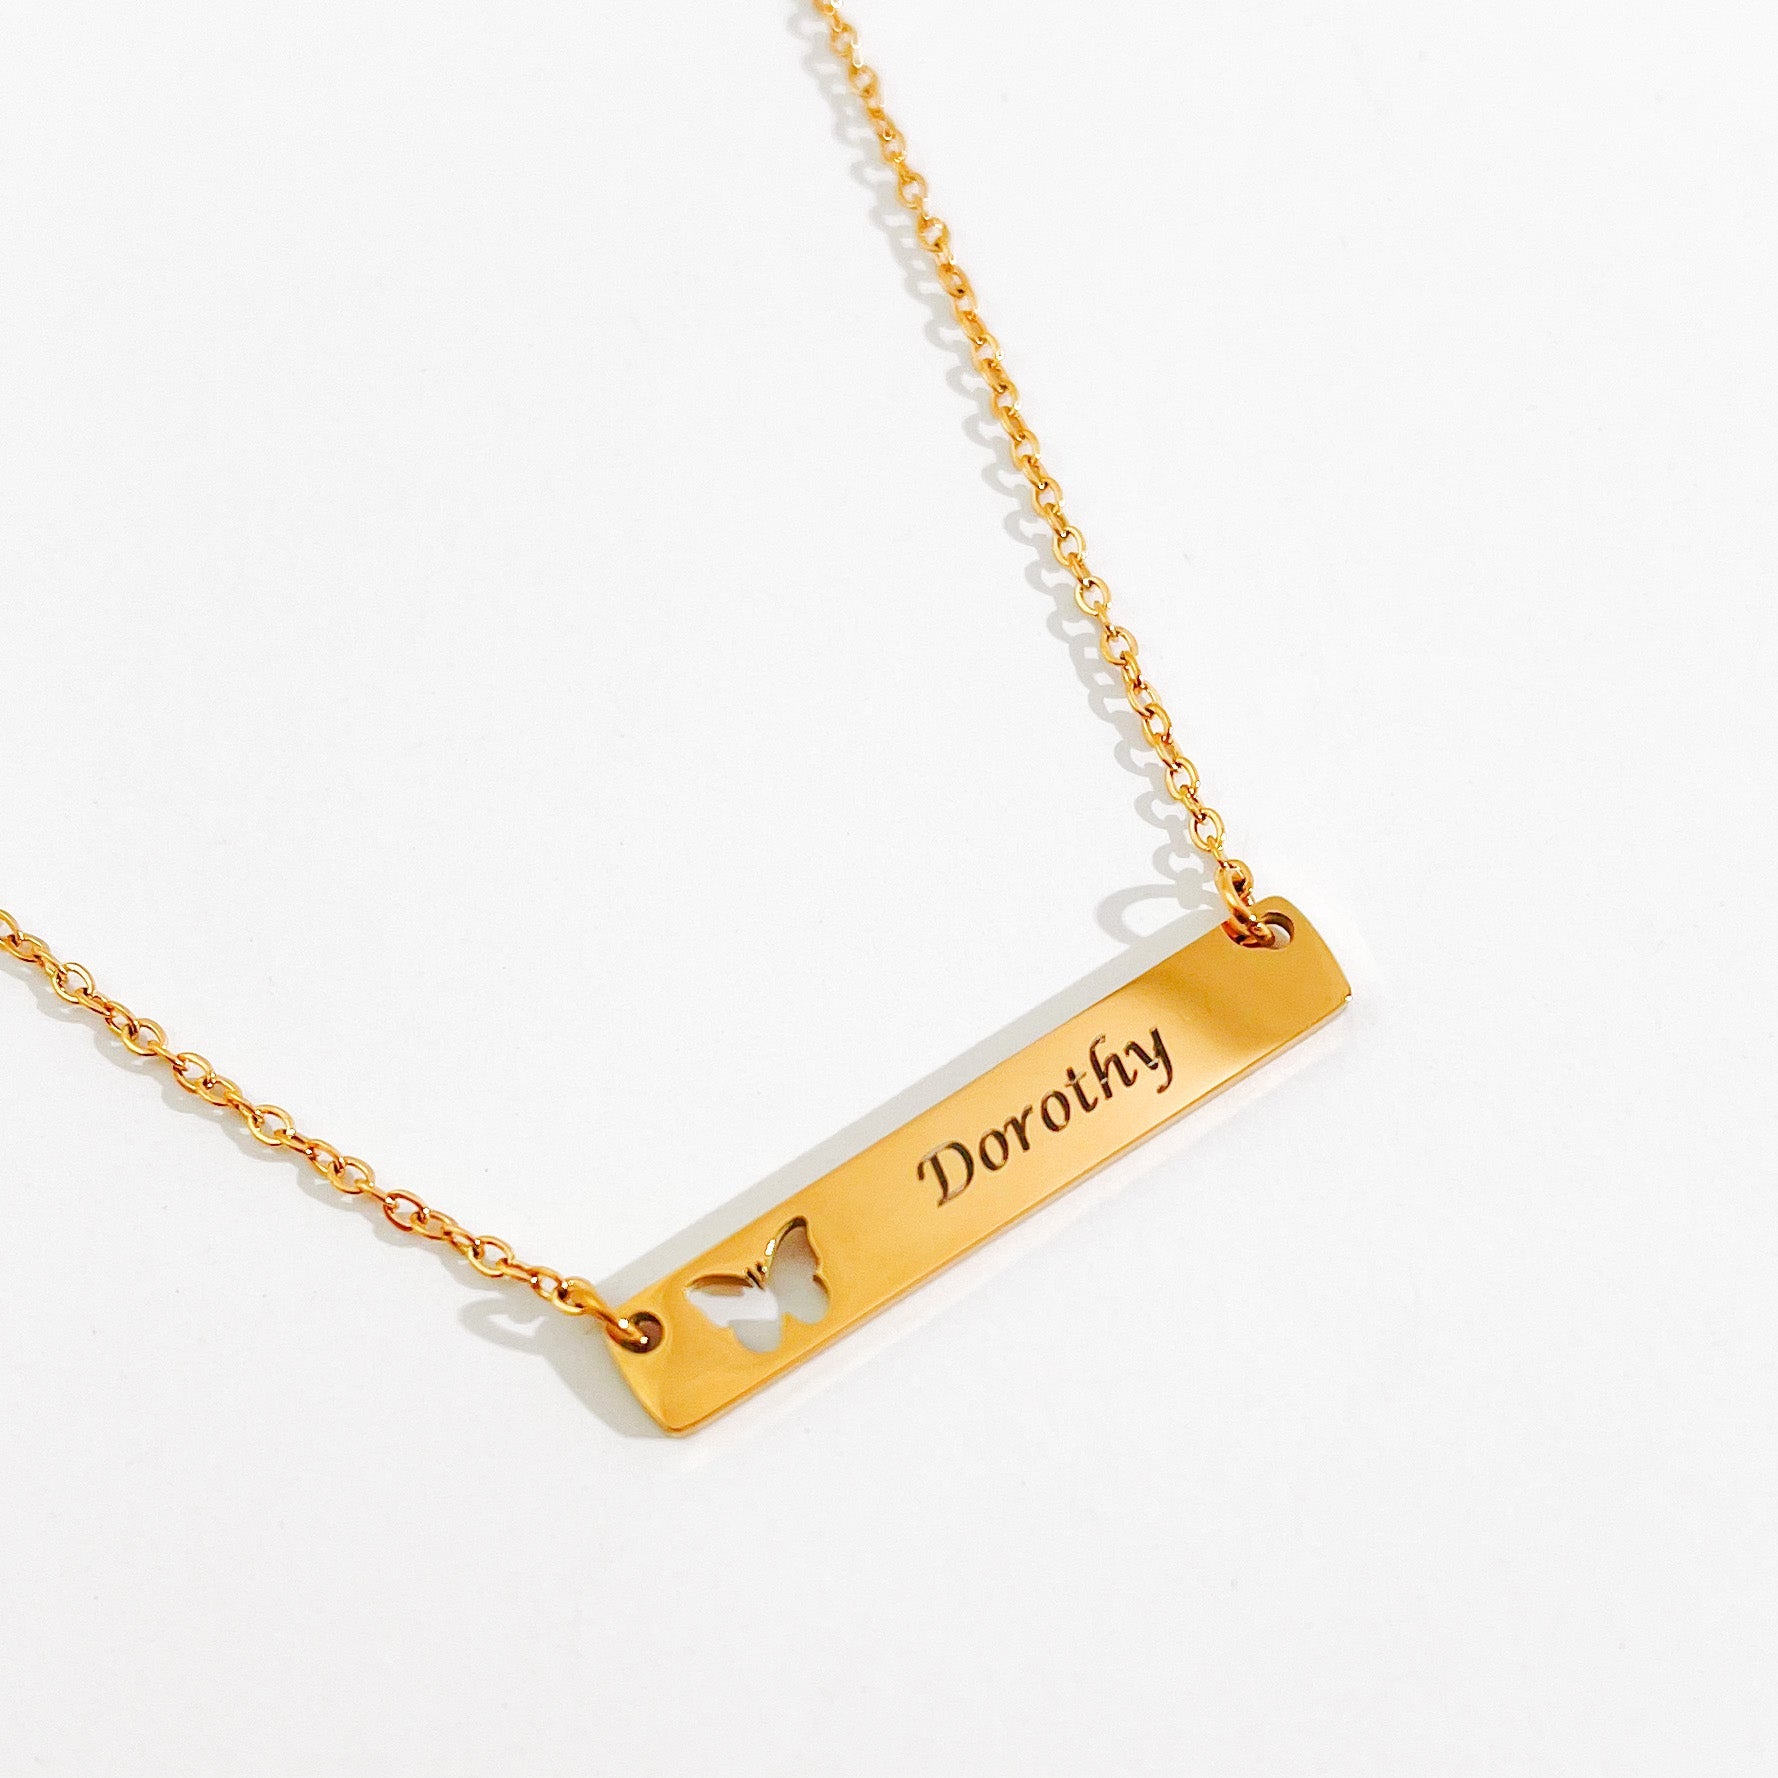 Butterfly Bar Necklace in Gold + Silver - Flaire & Co.